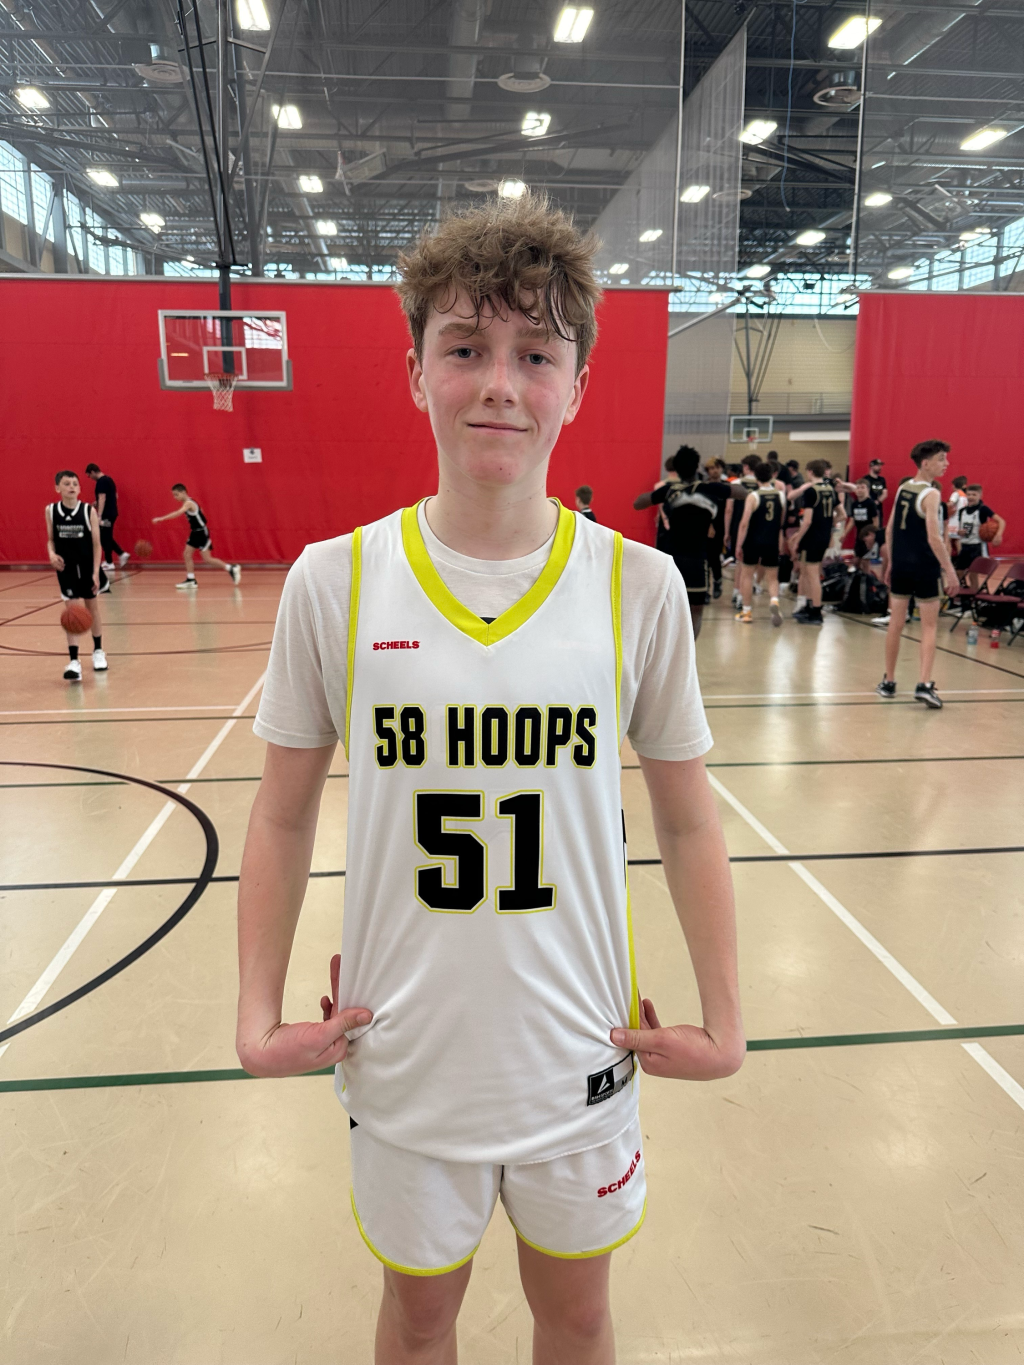 Next NHR State Tournament - Additional Prospects of Note